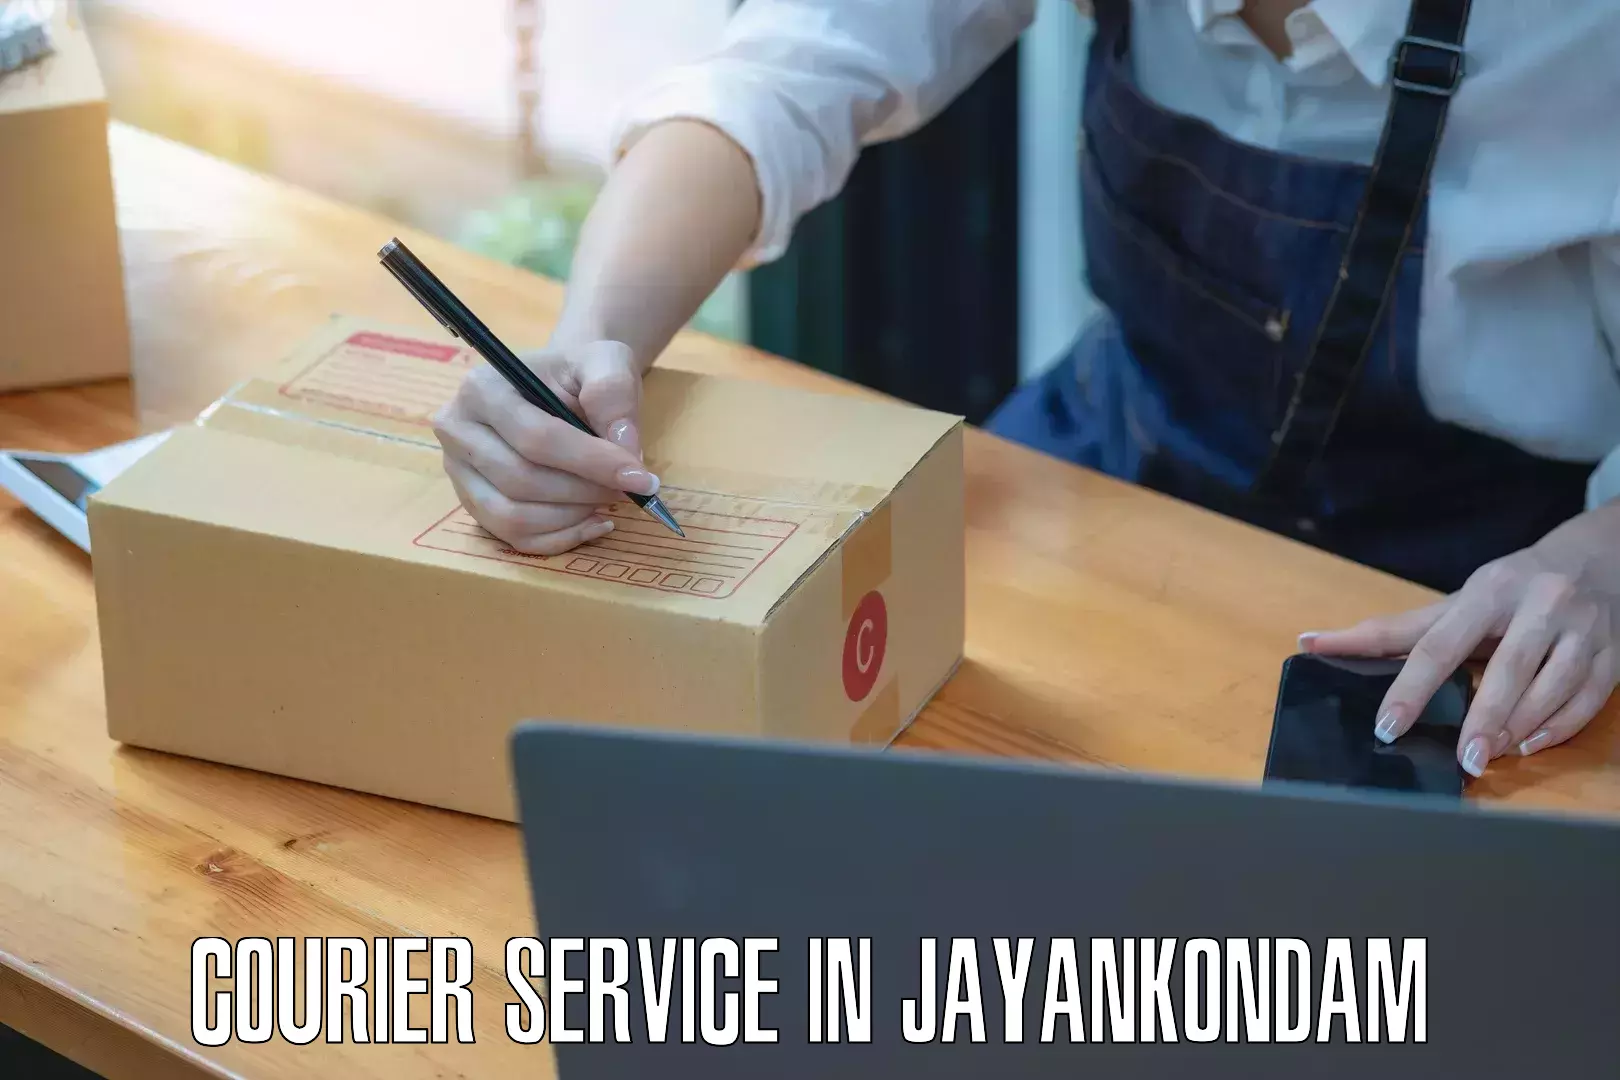 Tailored freight services in Jayankondam